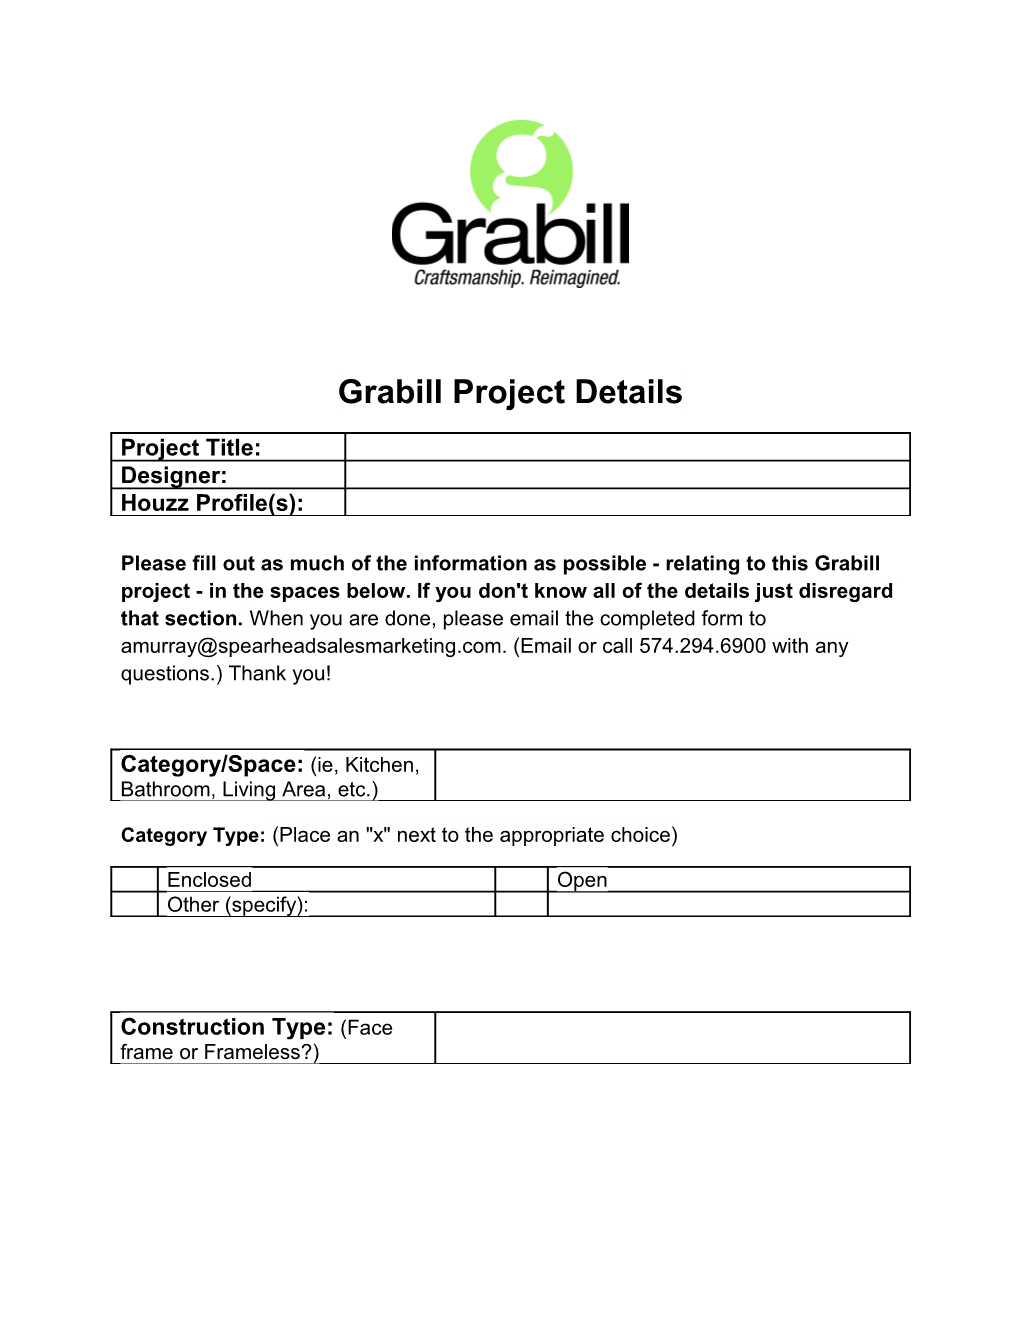 Grabill Project Details